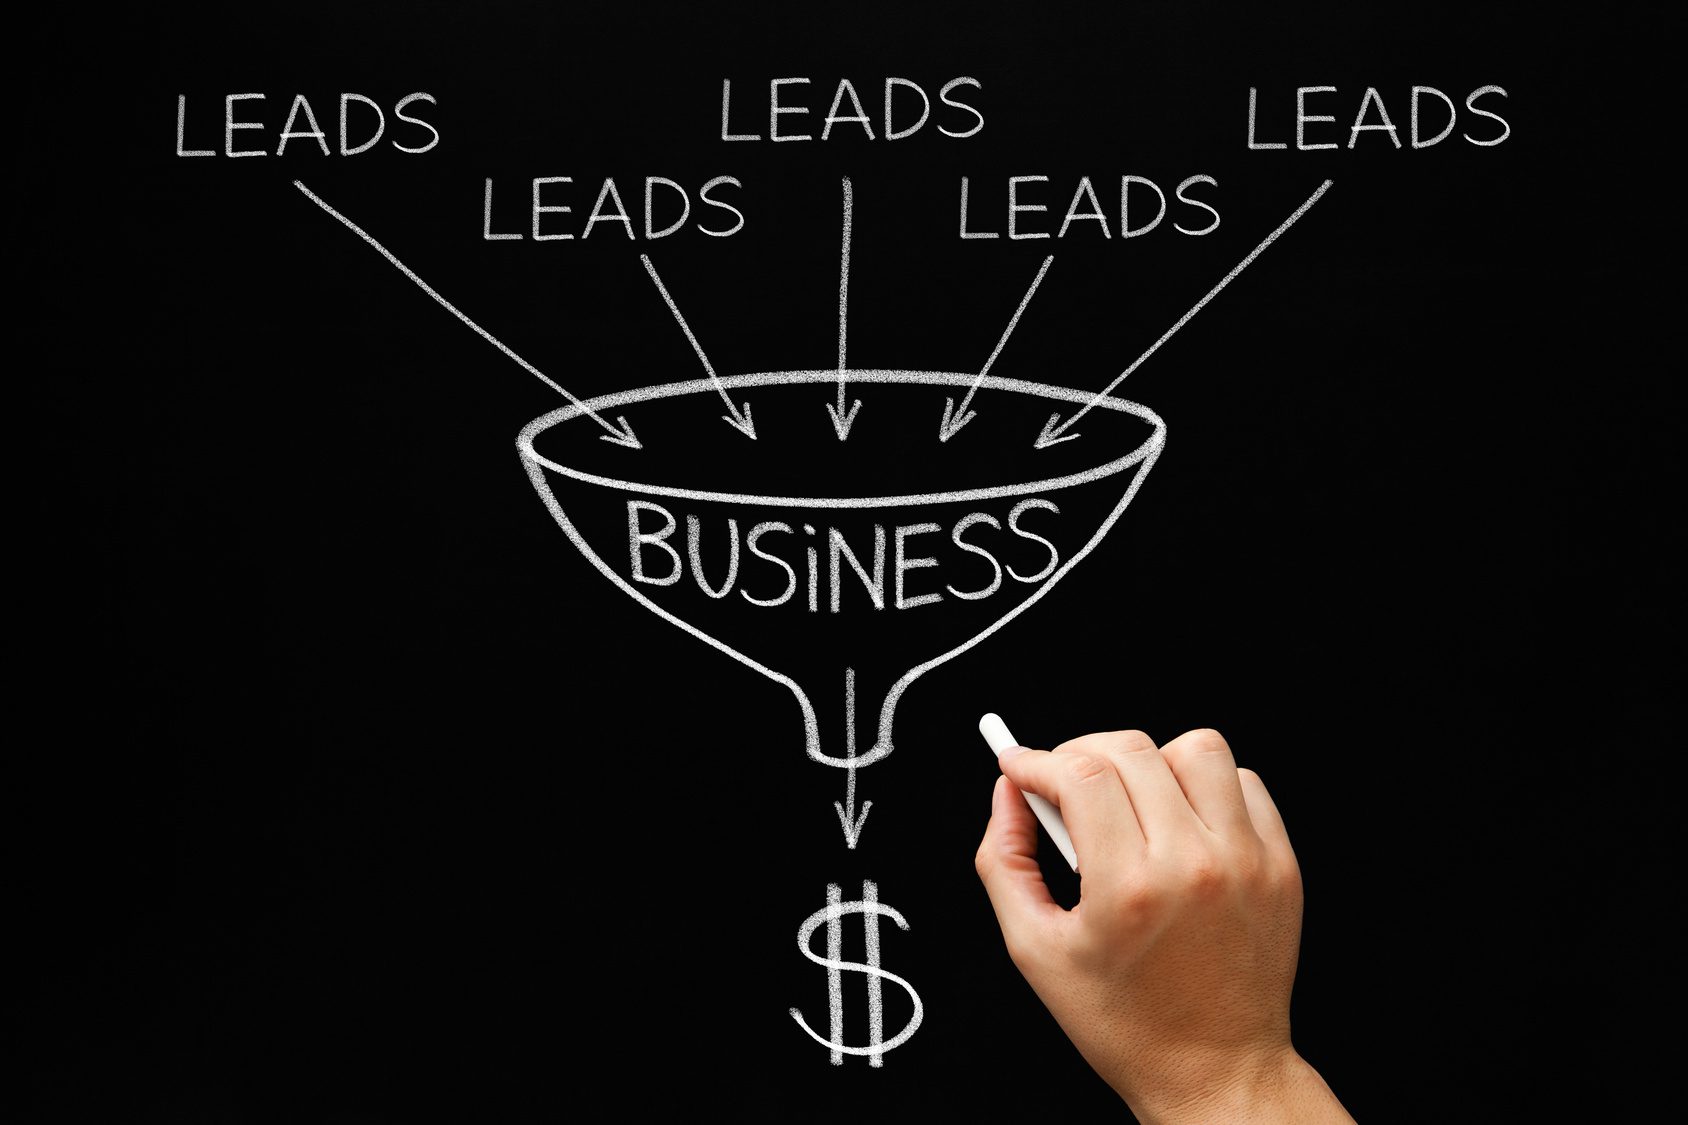 How to Convert Leads into Sales